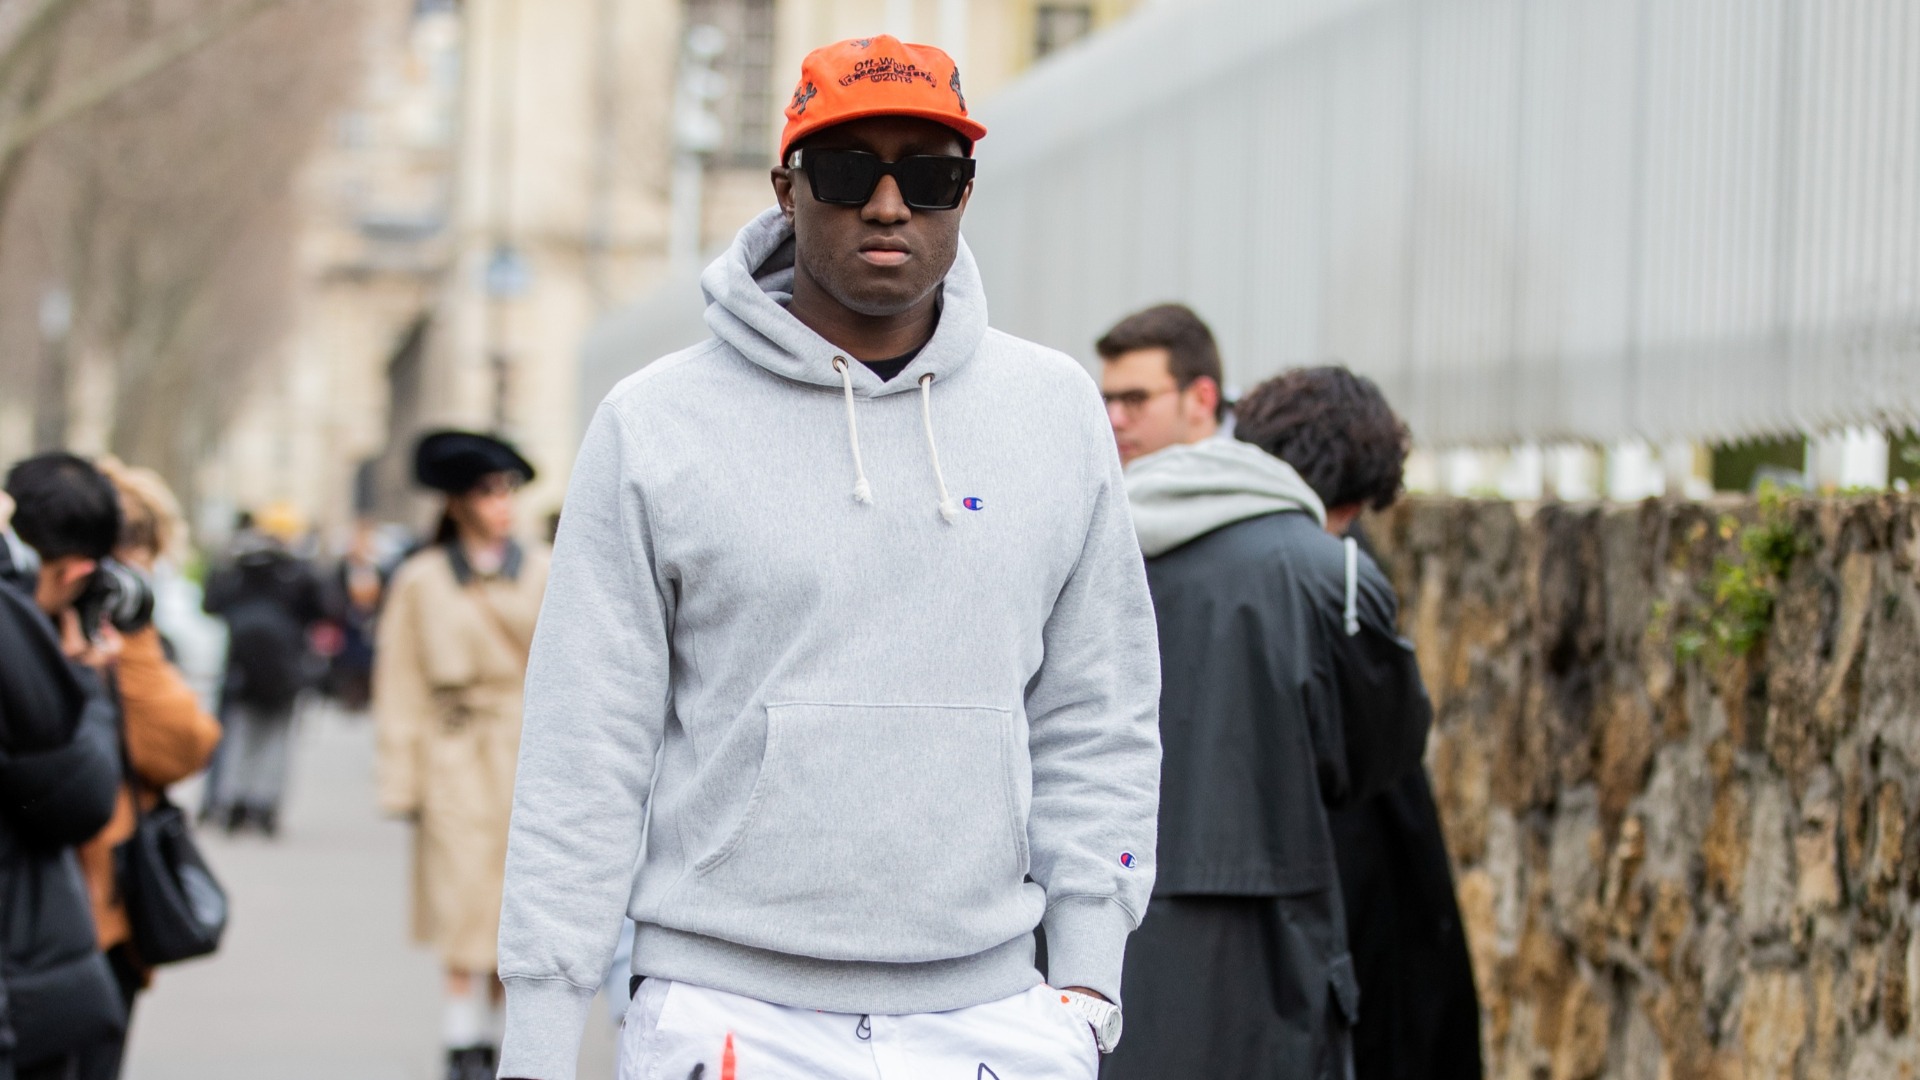 Virgil Abloh On Office Supplies, His New Jewellery Collaboration With Hip  Hop Jeweller Jacob & Co